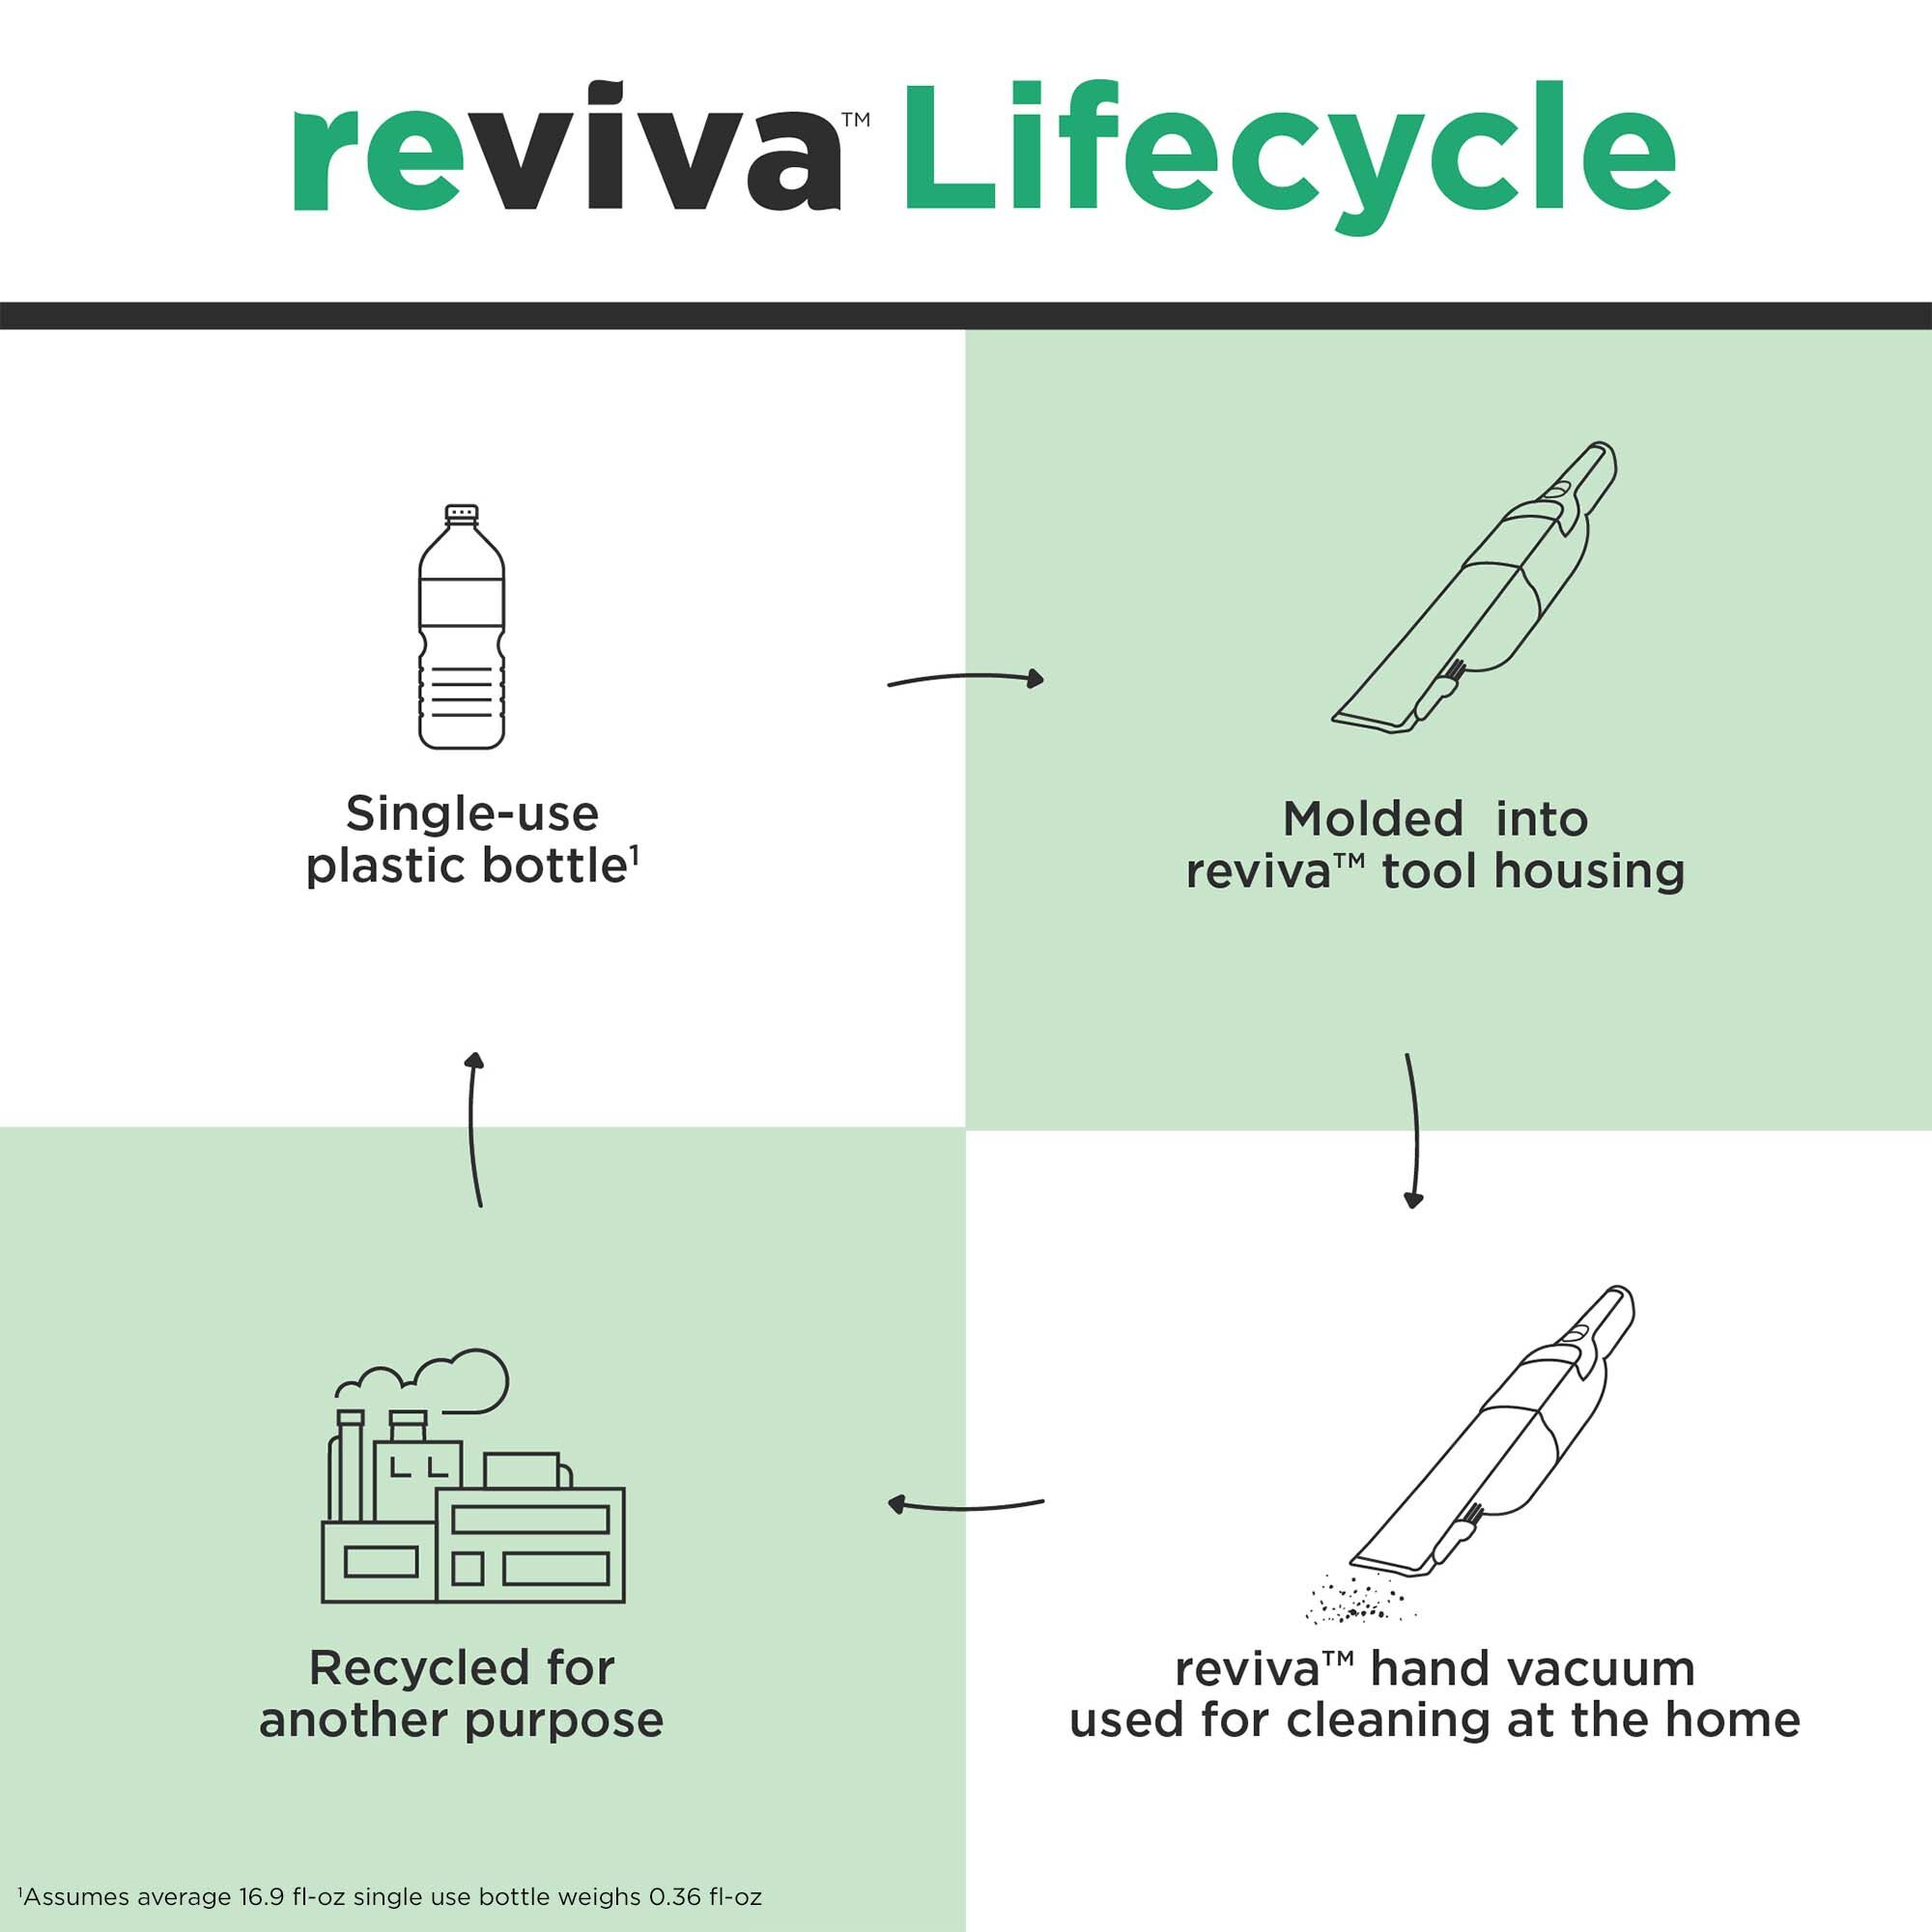 Lifecycle of the reviva hand vac